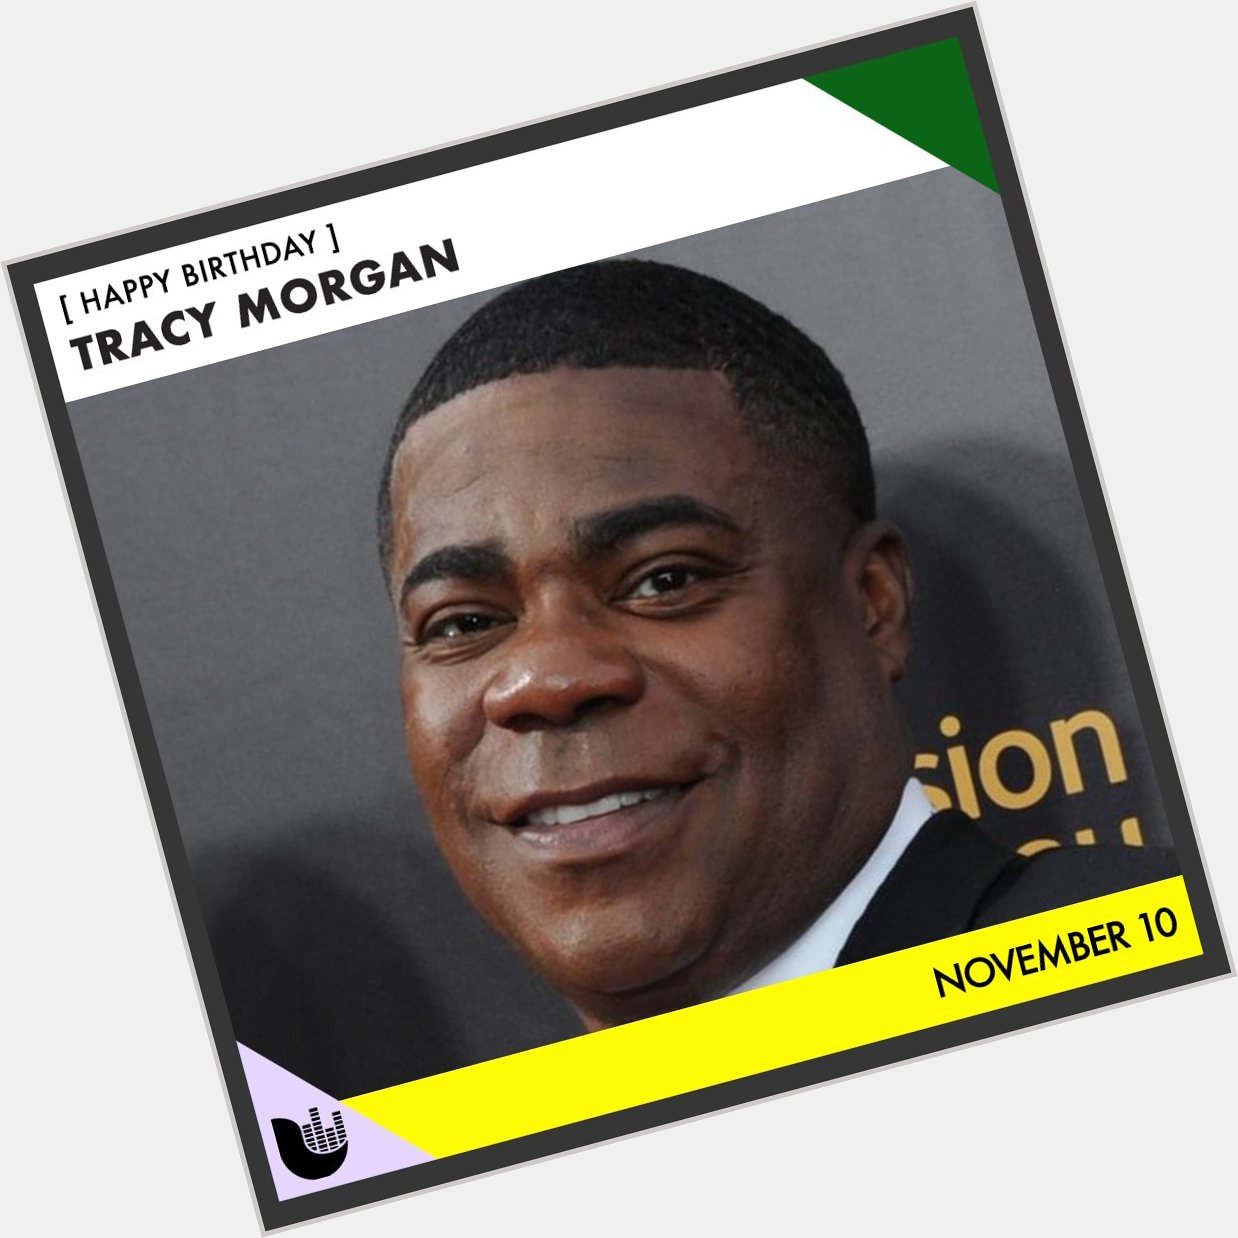 Join us in wishing Tracy Morgan and Diplo a happy birthday! 